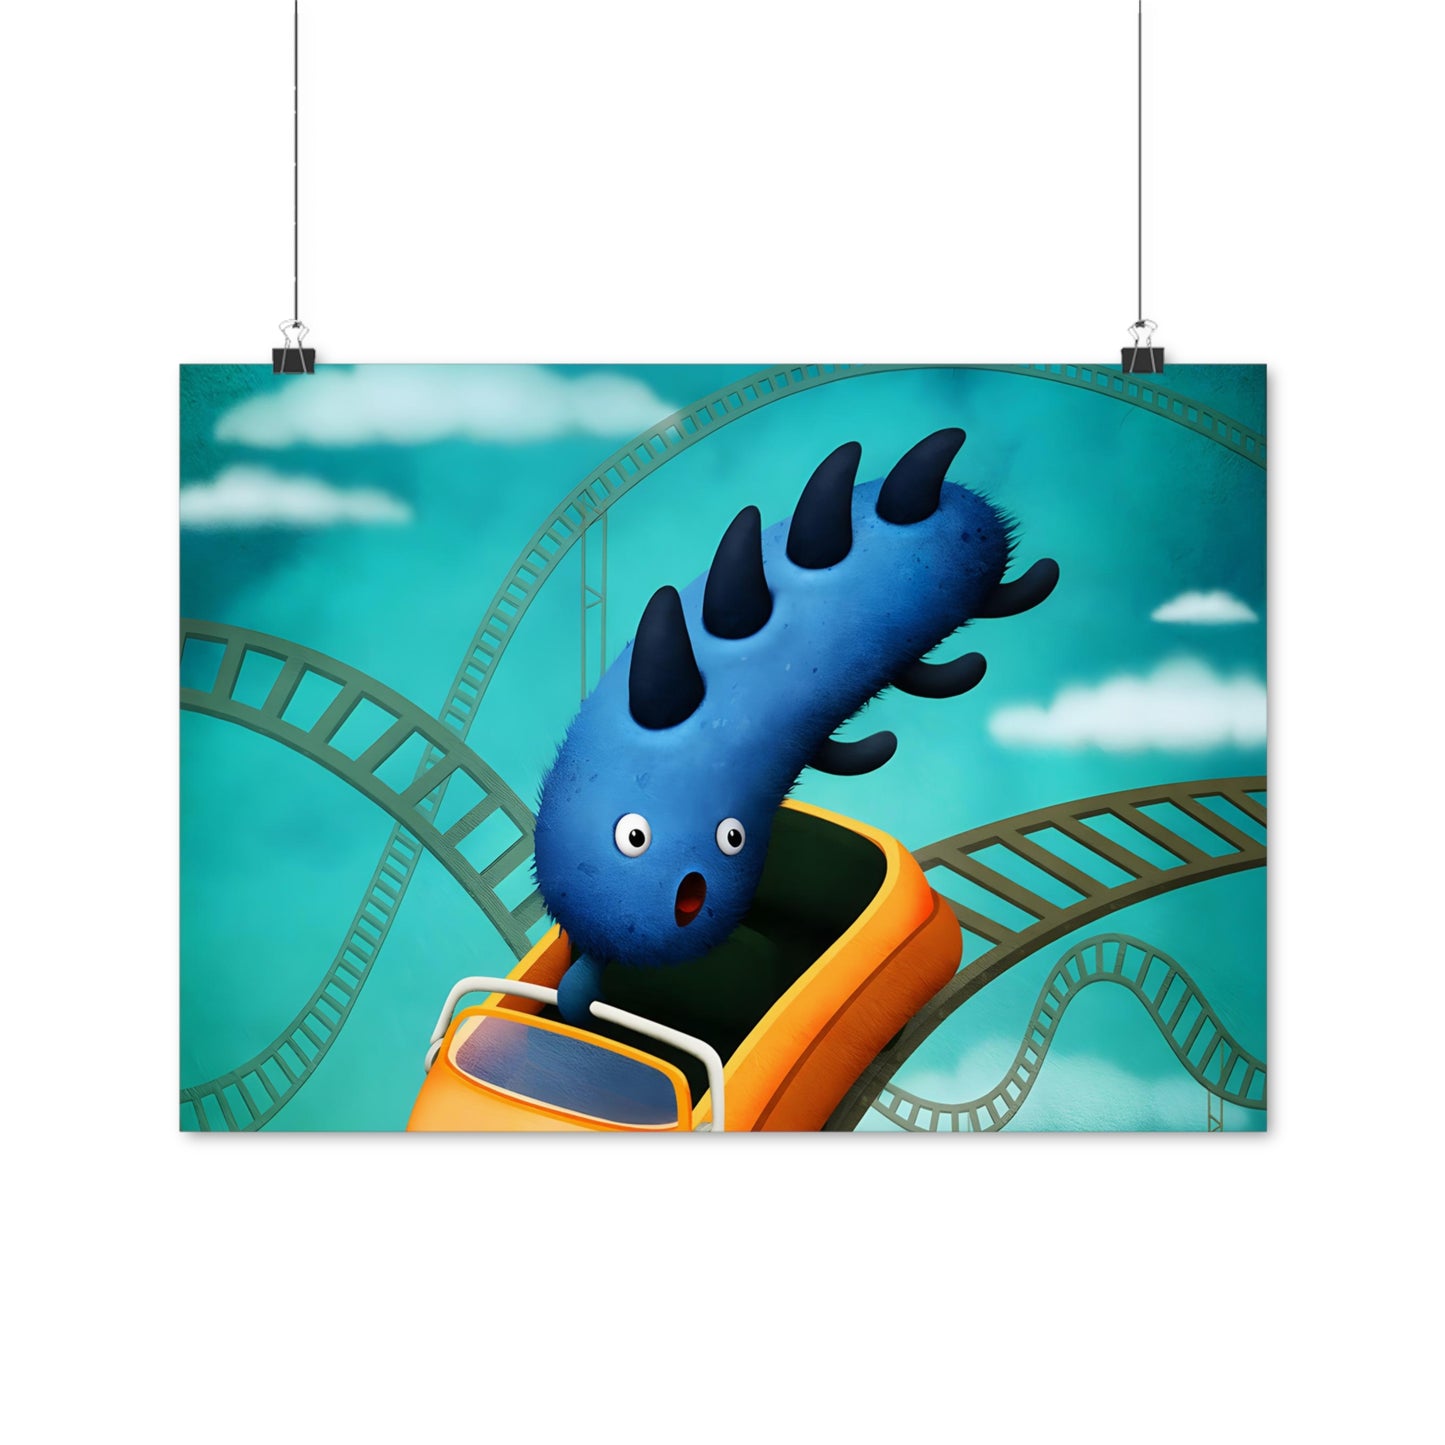 Posters - The Roller Coaster